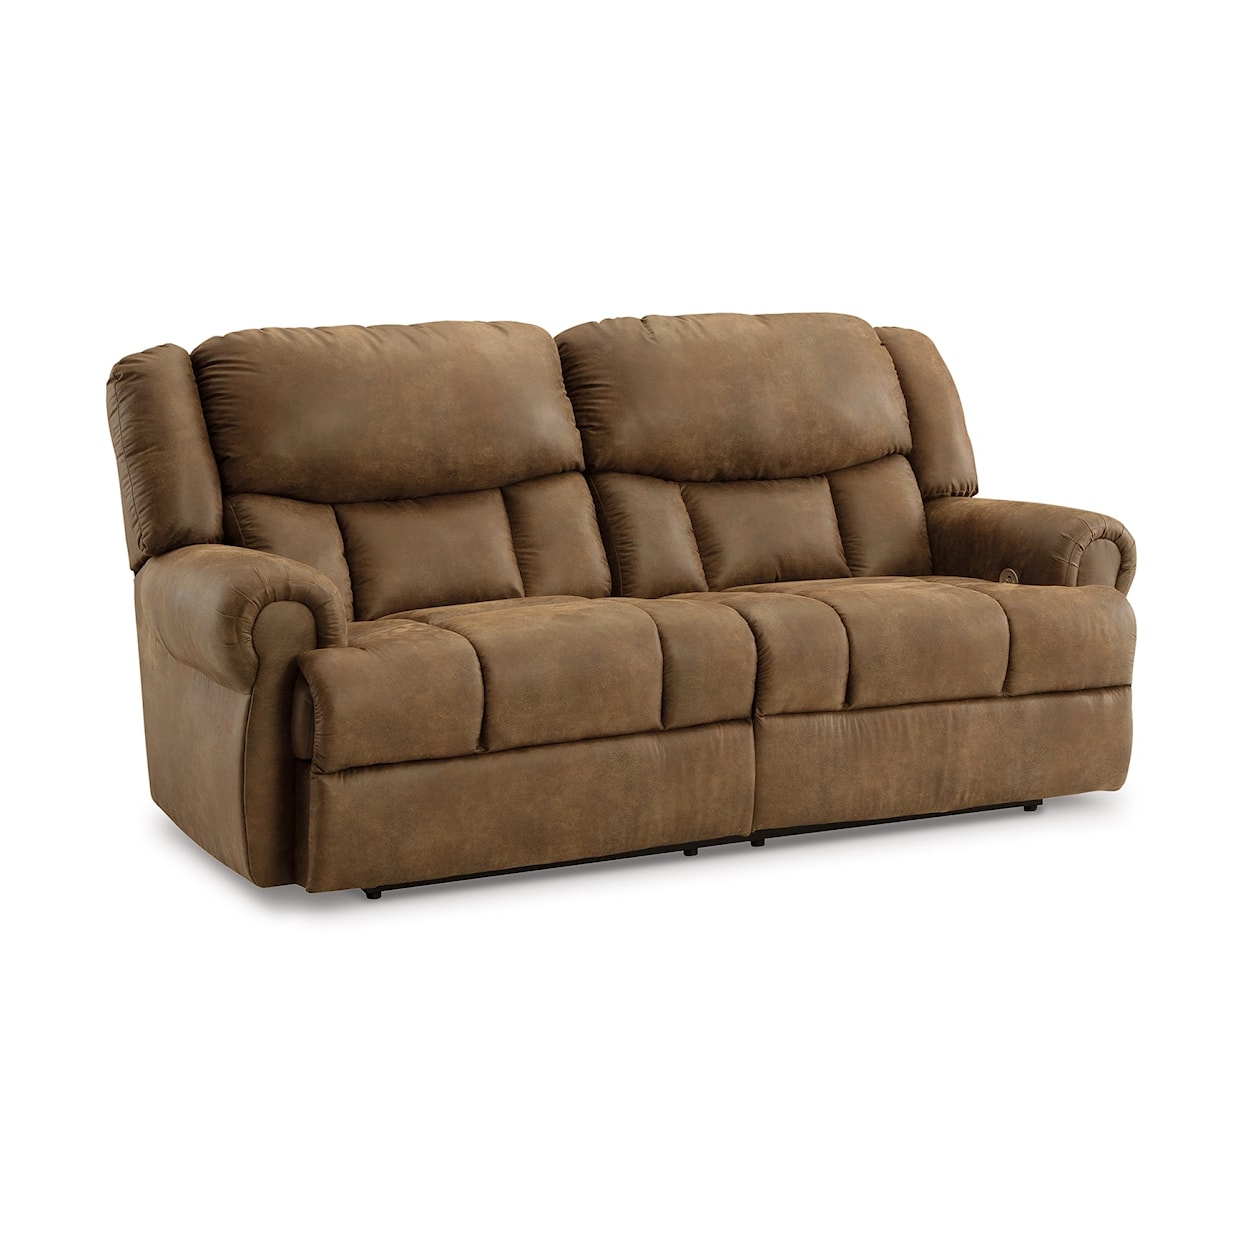 Signature Design by Ashley Furniture Boothbay 2 Seat Reclining Power Sofa